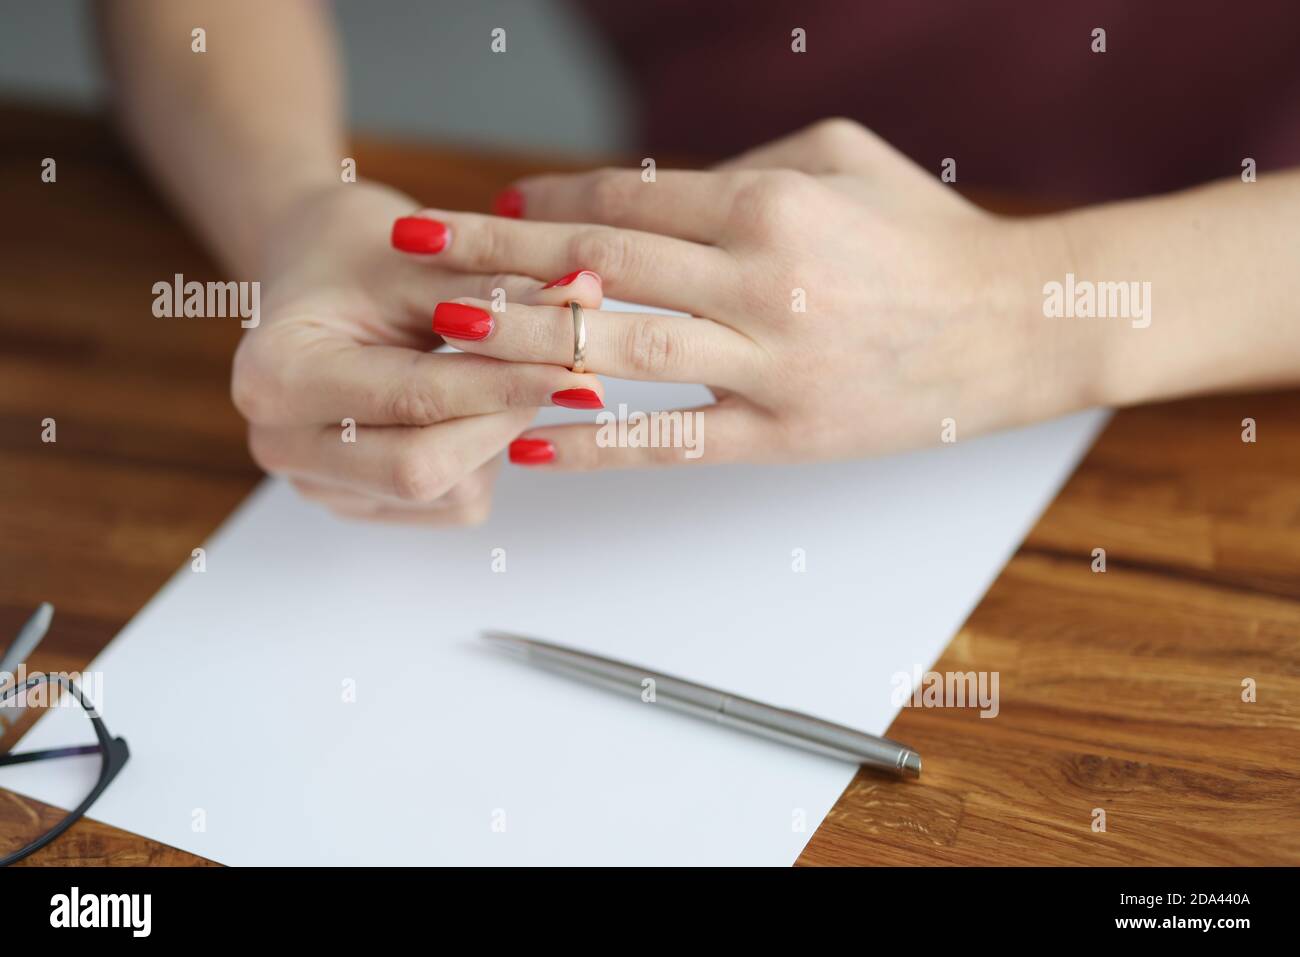 Woman's hand removes wedding ring from her finger. Stock Photo